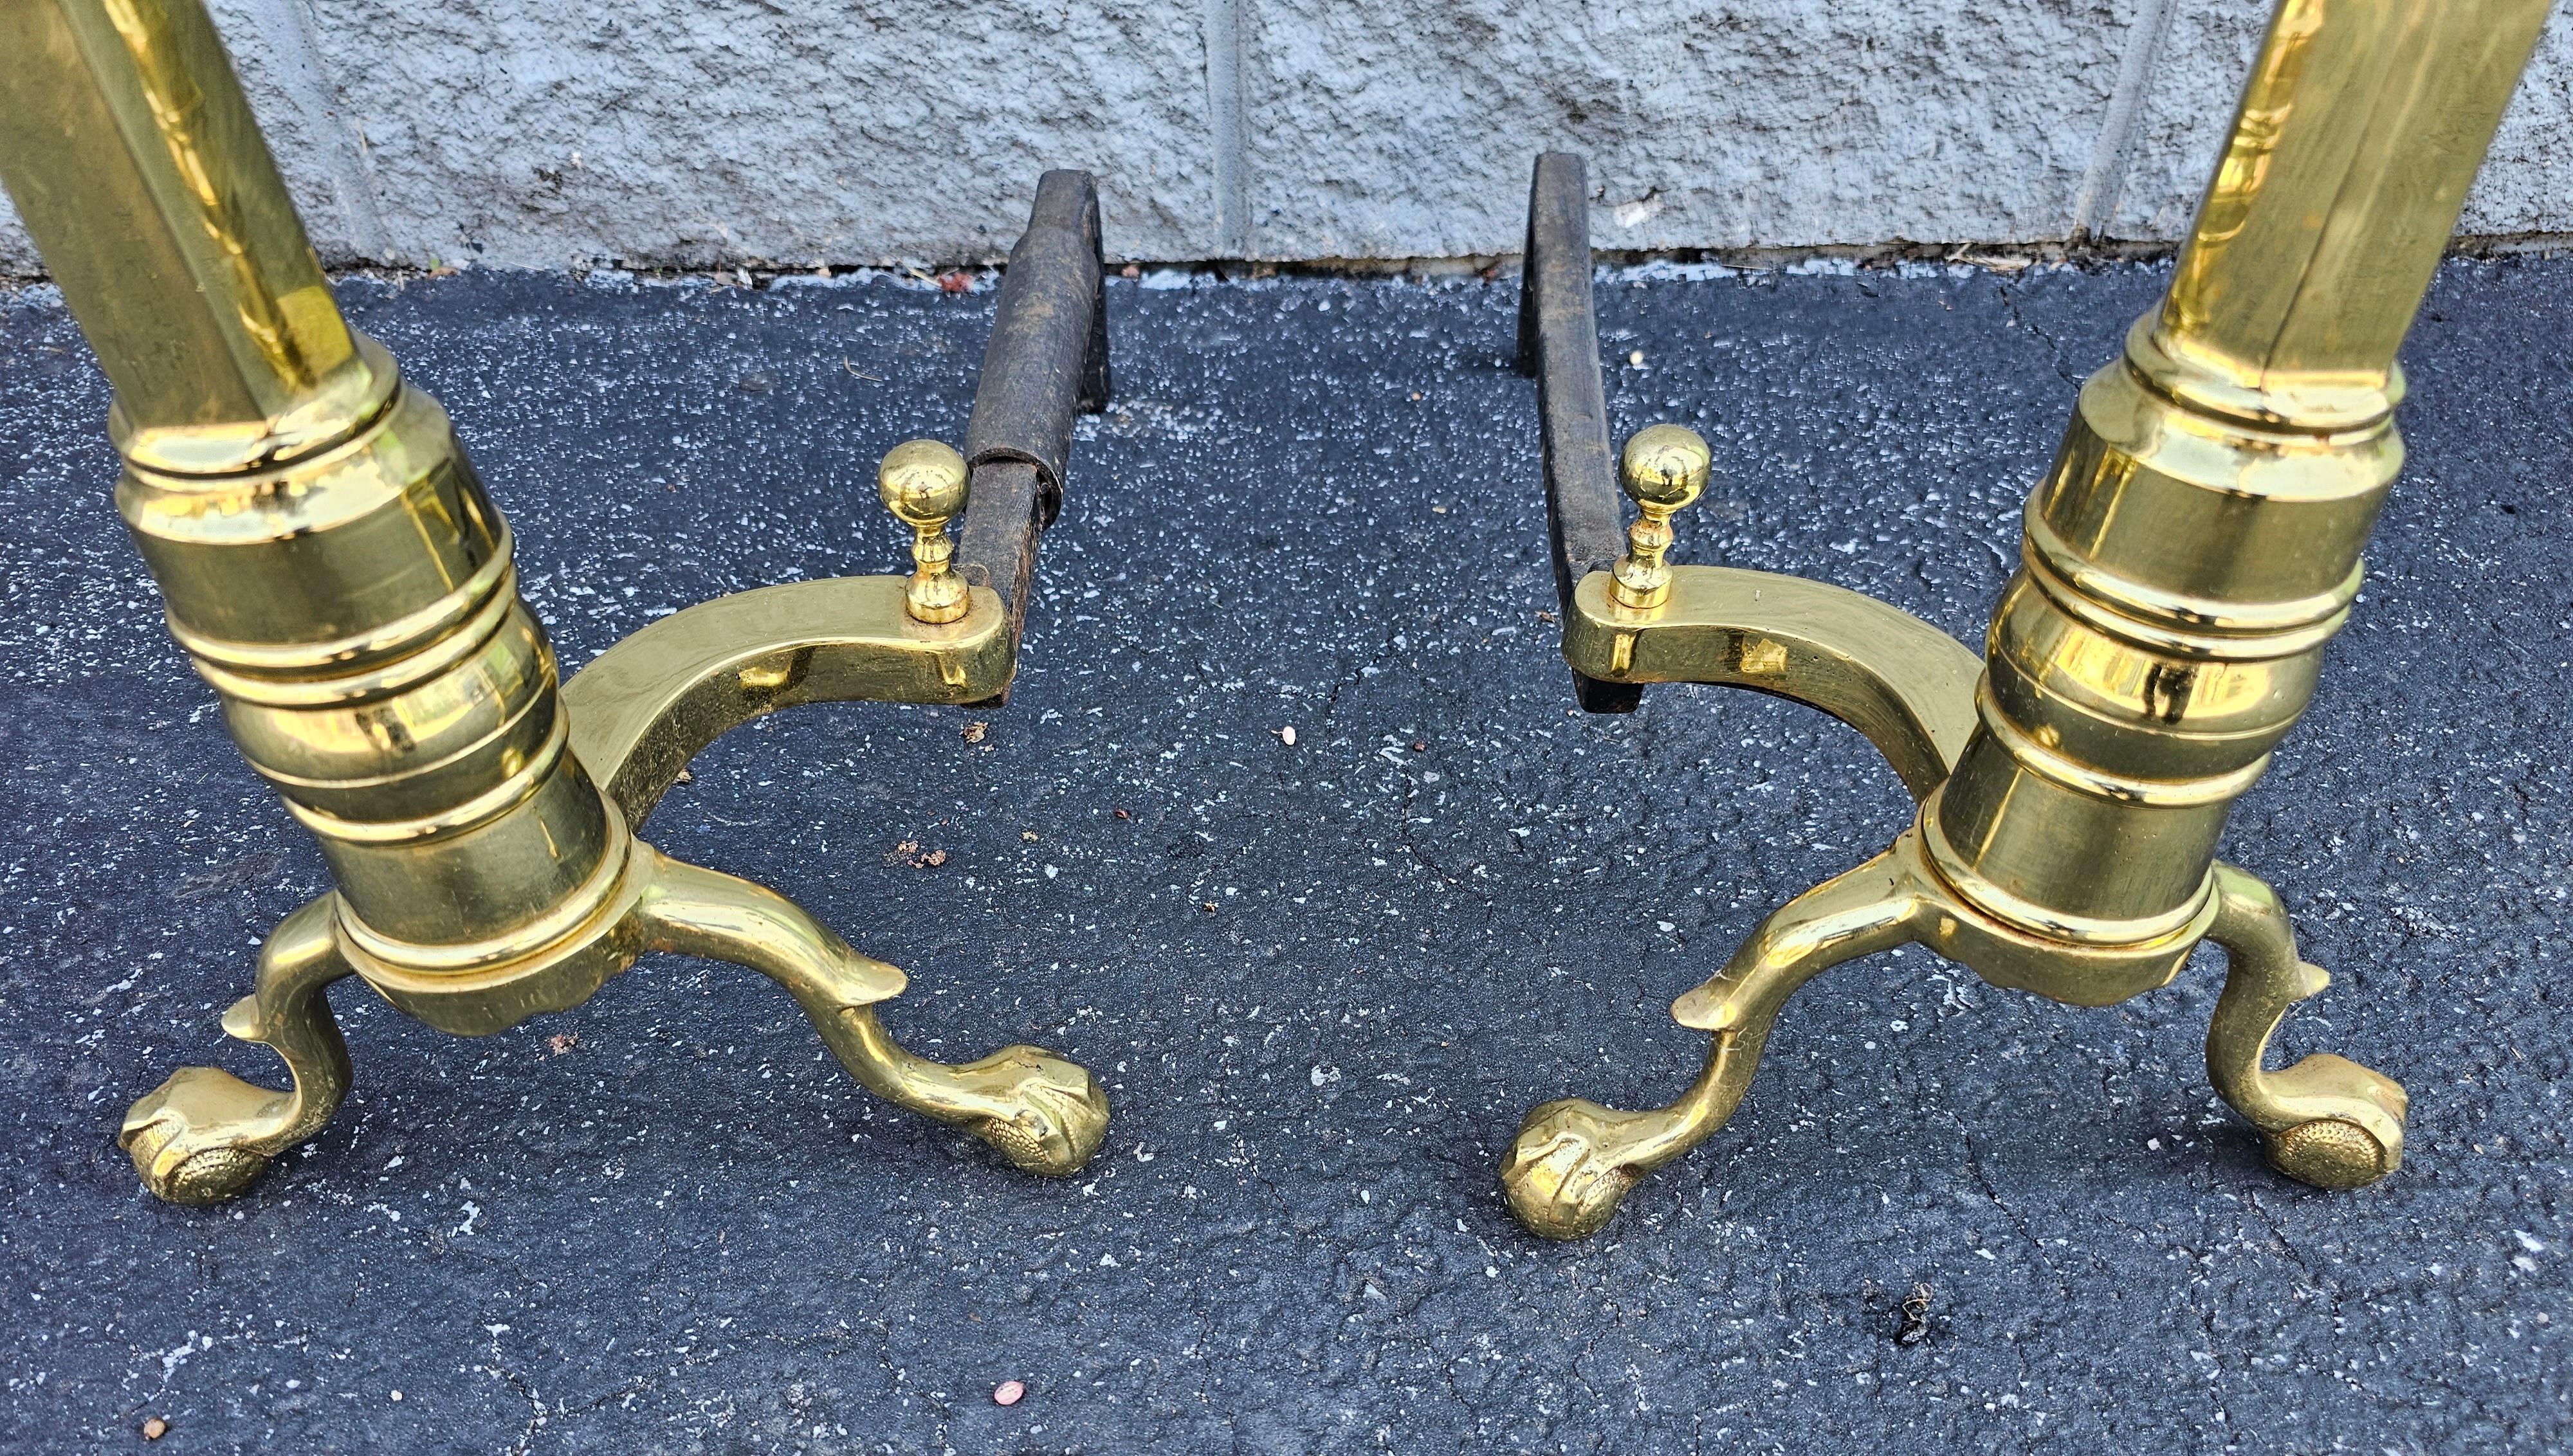 We are offering from a Richmond, Virginia estate a very fine pair of Virginia Metalcrafters (Harvin) brass andirons in the 